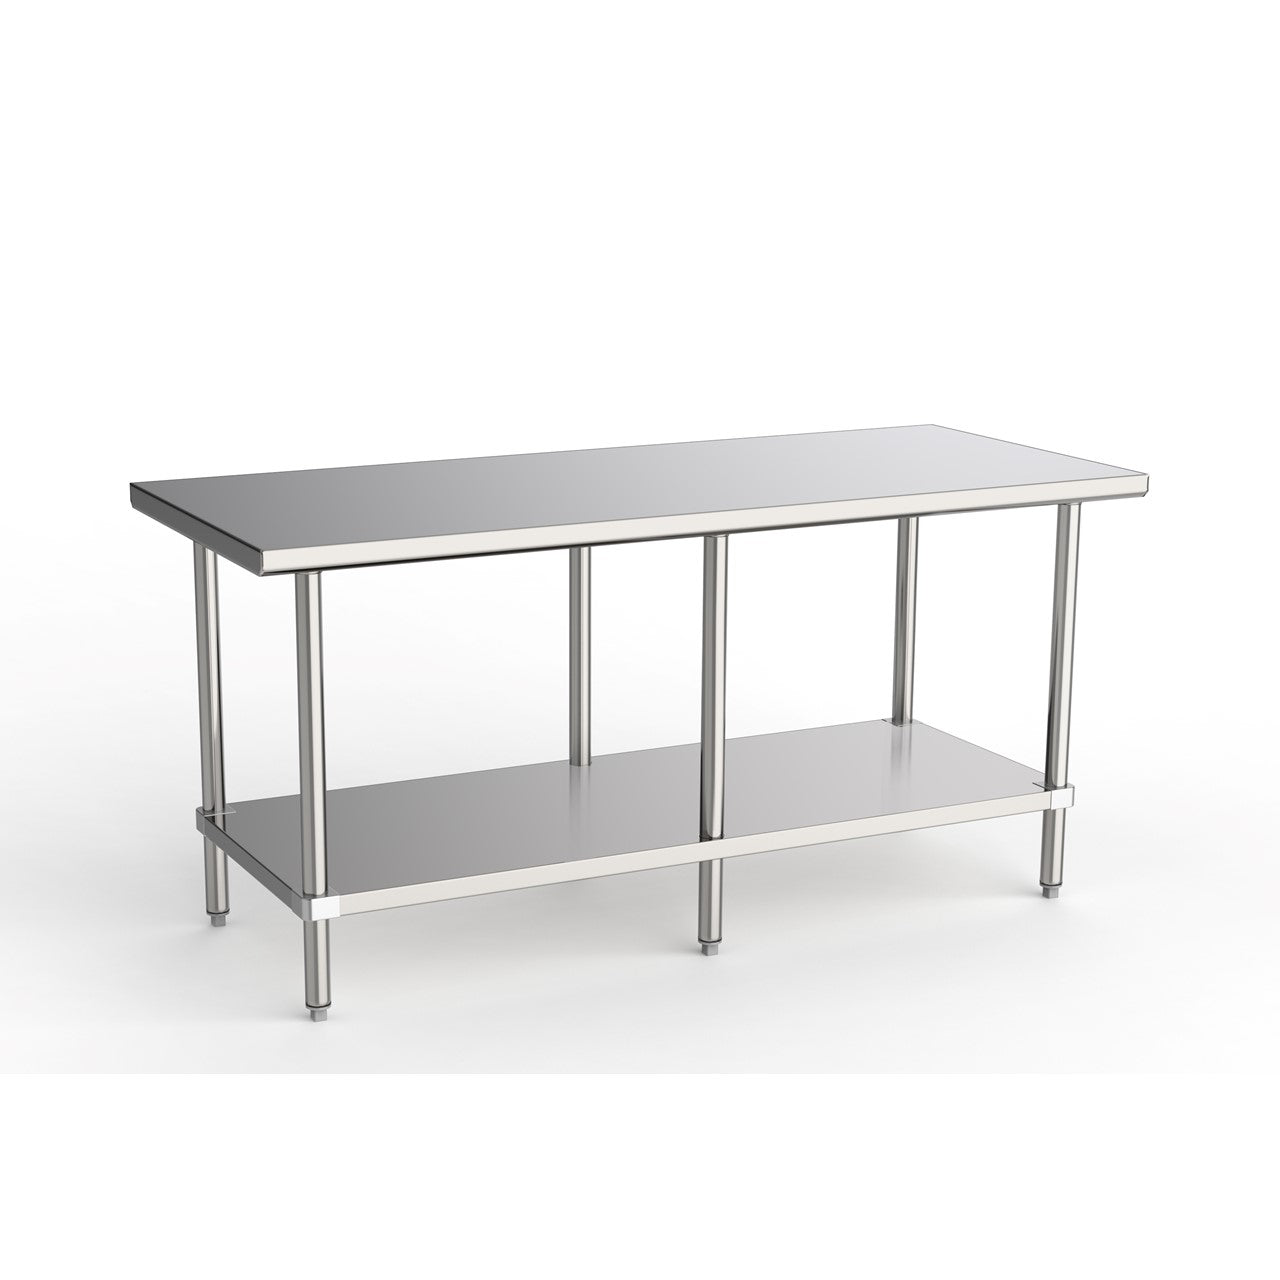 GSW Commercial Grade Flat Top Work Table with Stainless Steel Top, Galvanized Undershelf & Legs, Adjustable Bullet Feet, NSF/ETL Approved to Meet Sanitation Food Service Standard 37 (30"W x 96"L x 35"H)